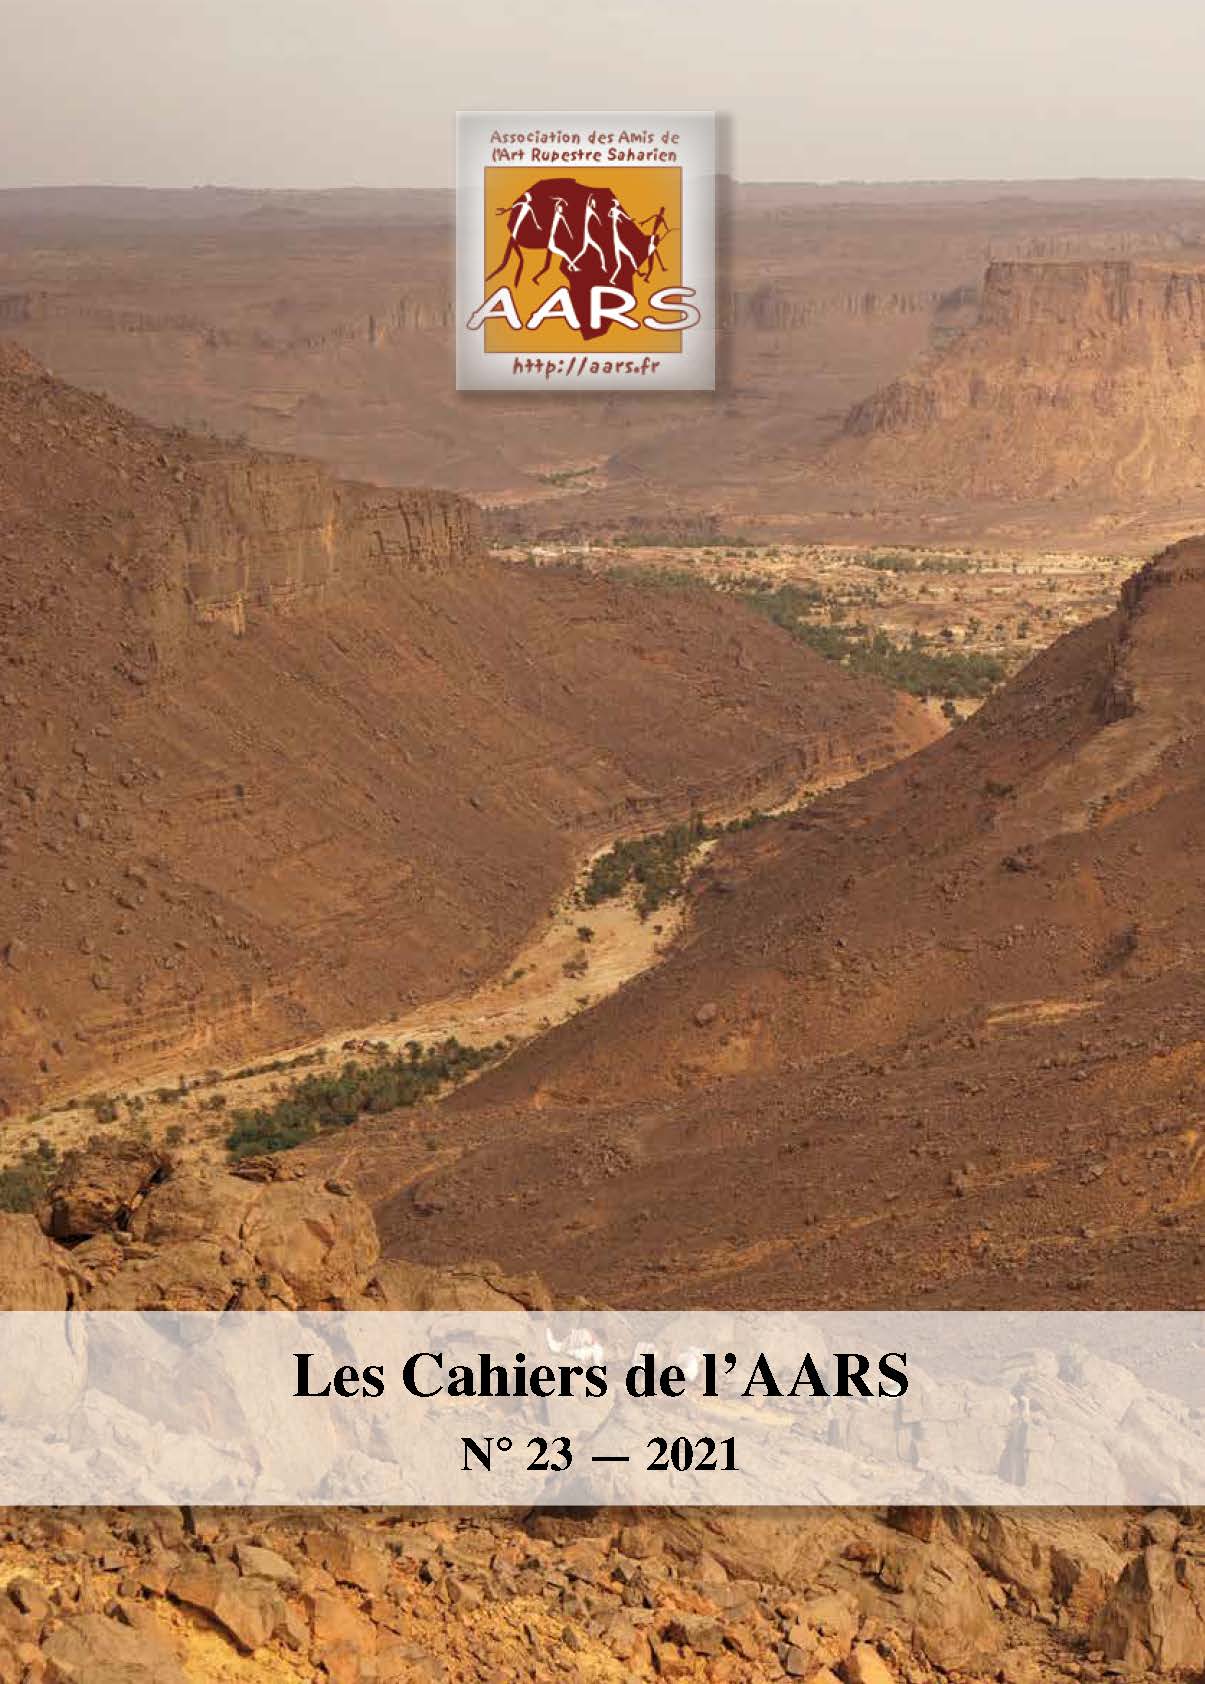 You are currently viewing Les Cahiers de l’AARS N° 23-2021